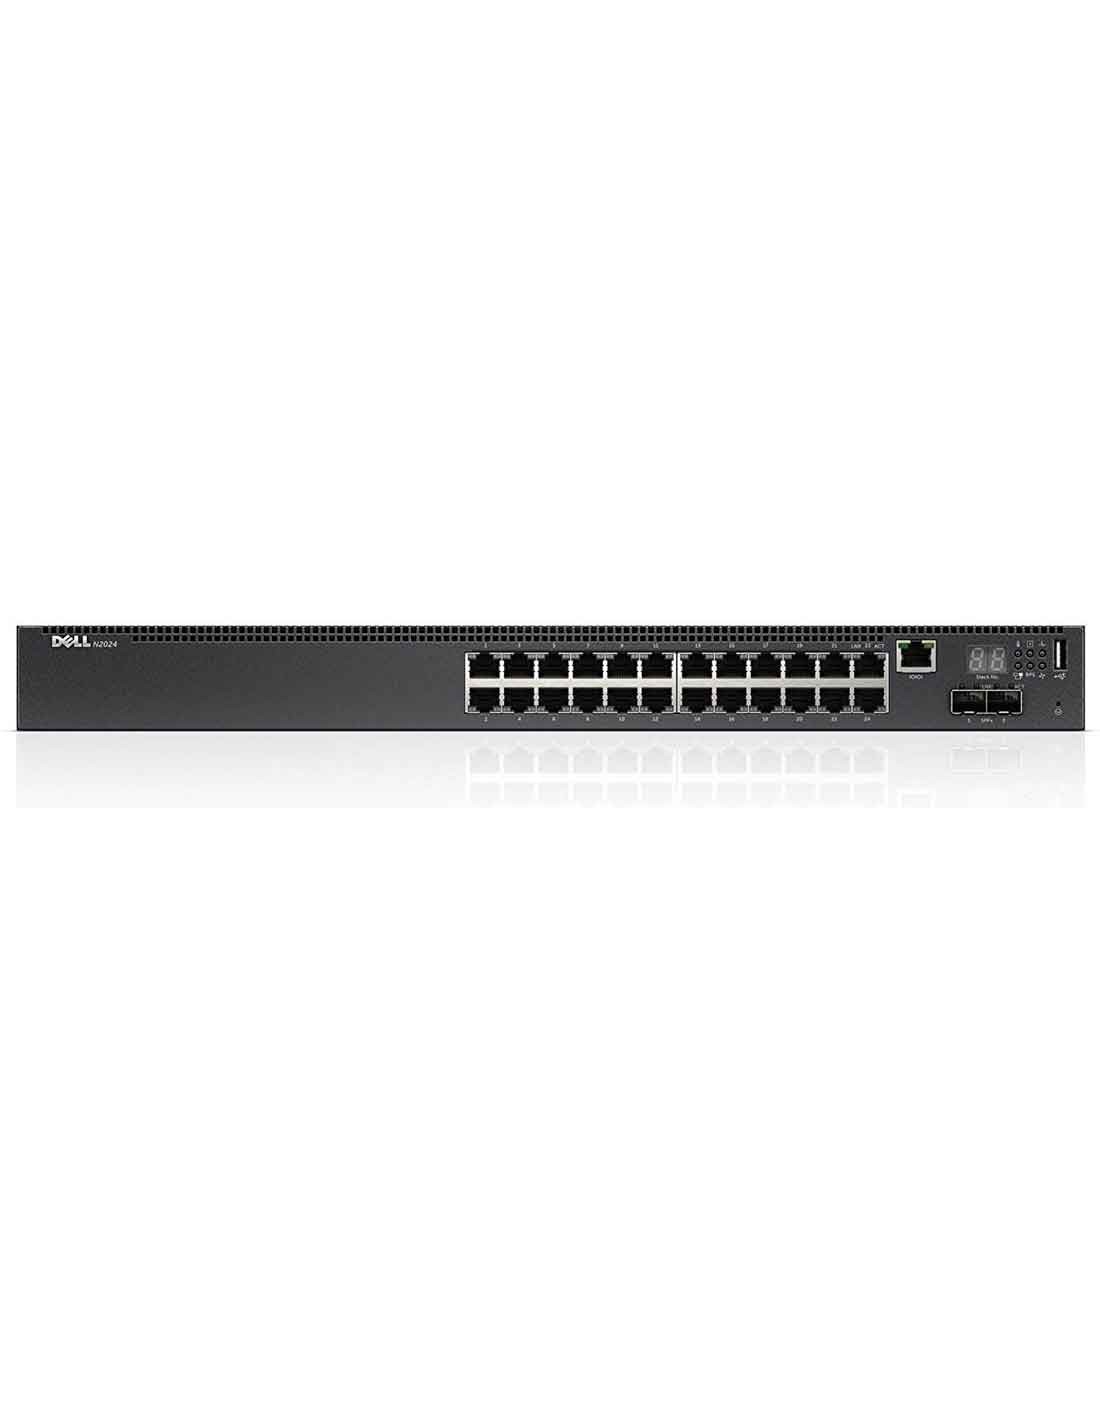 Dell Networking N2024 Switch 24 x 10/100/1000 + 2 x 10 Gigabit SFP+ at a cheap price in Dubai